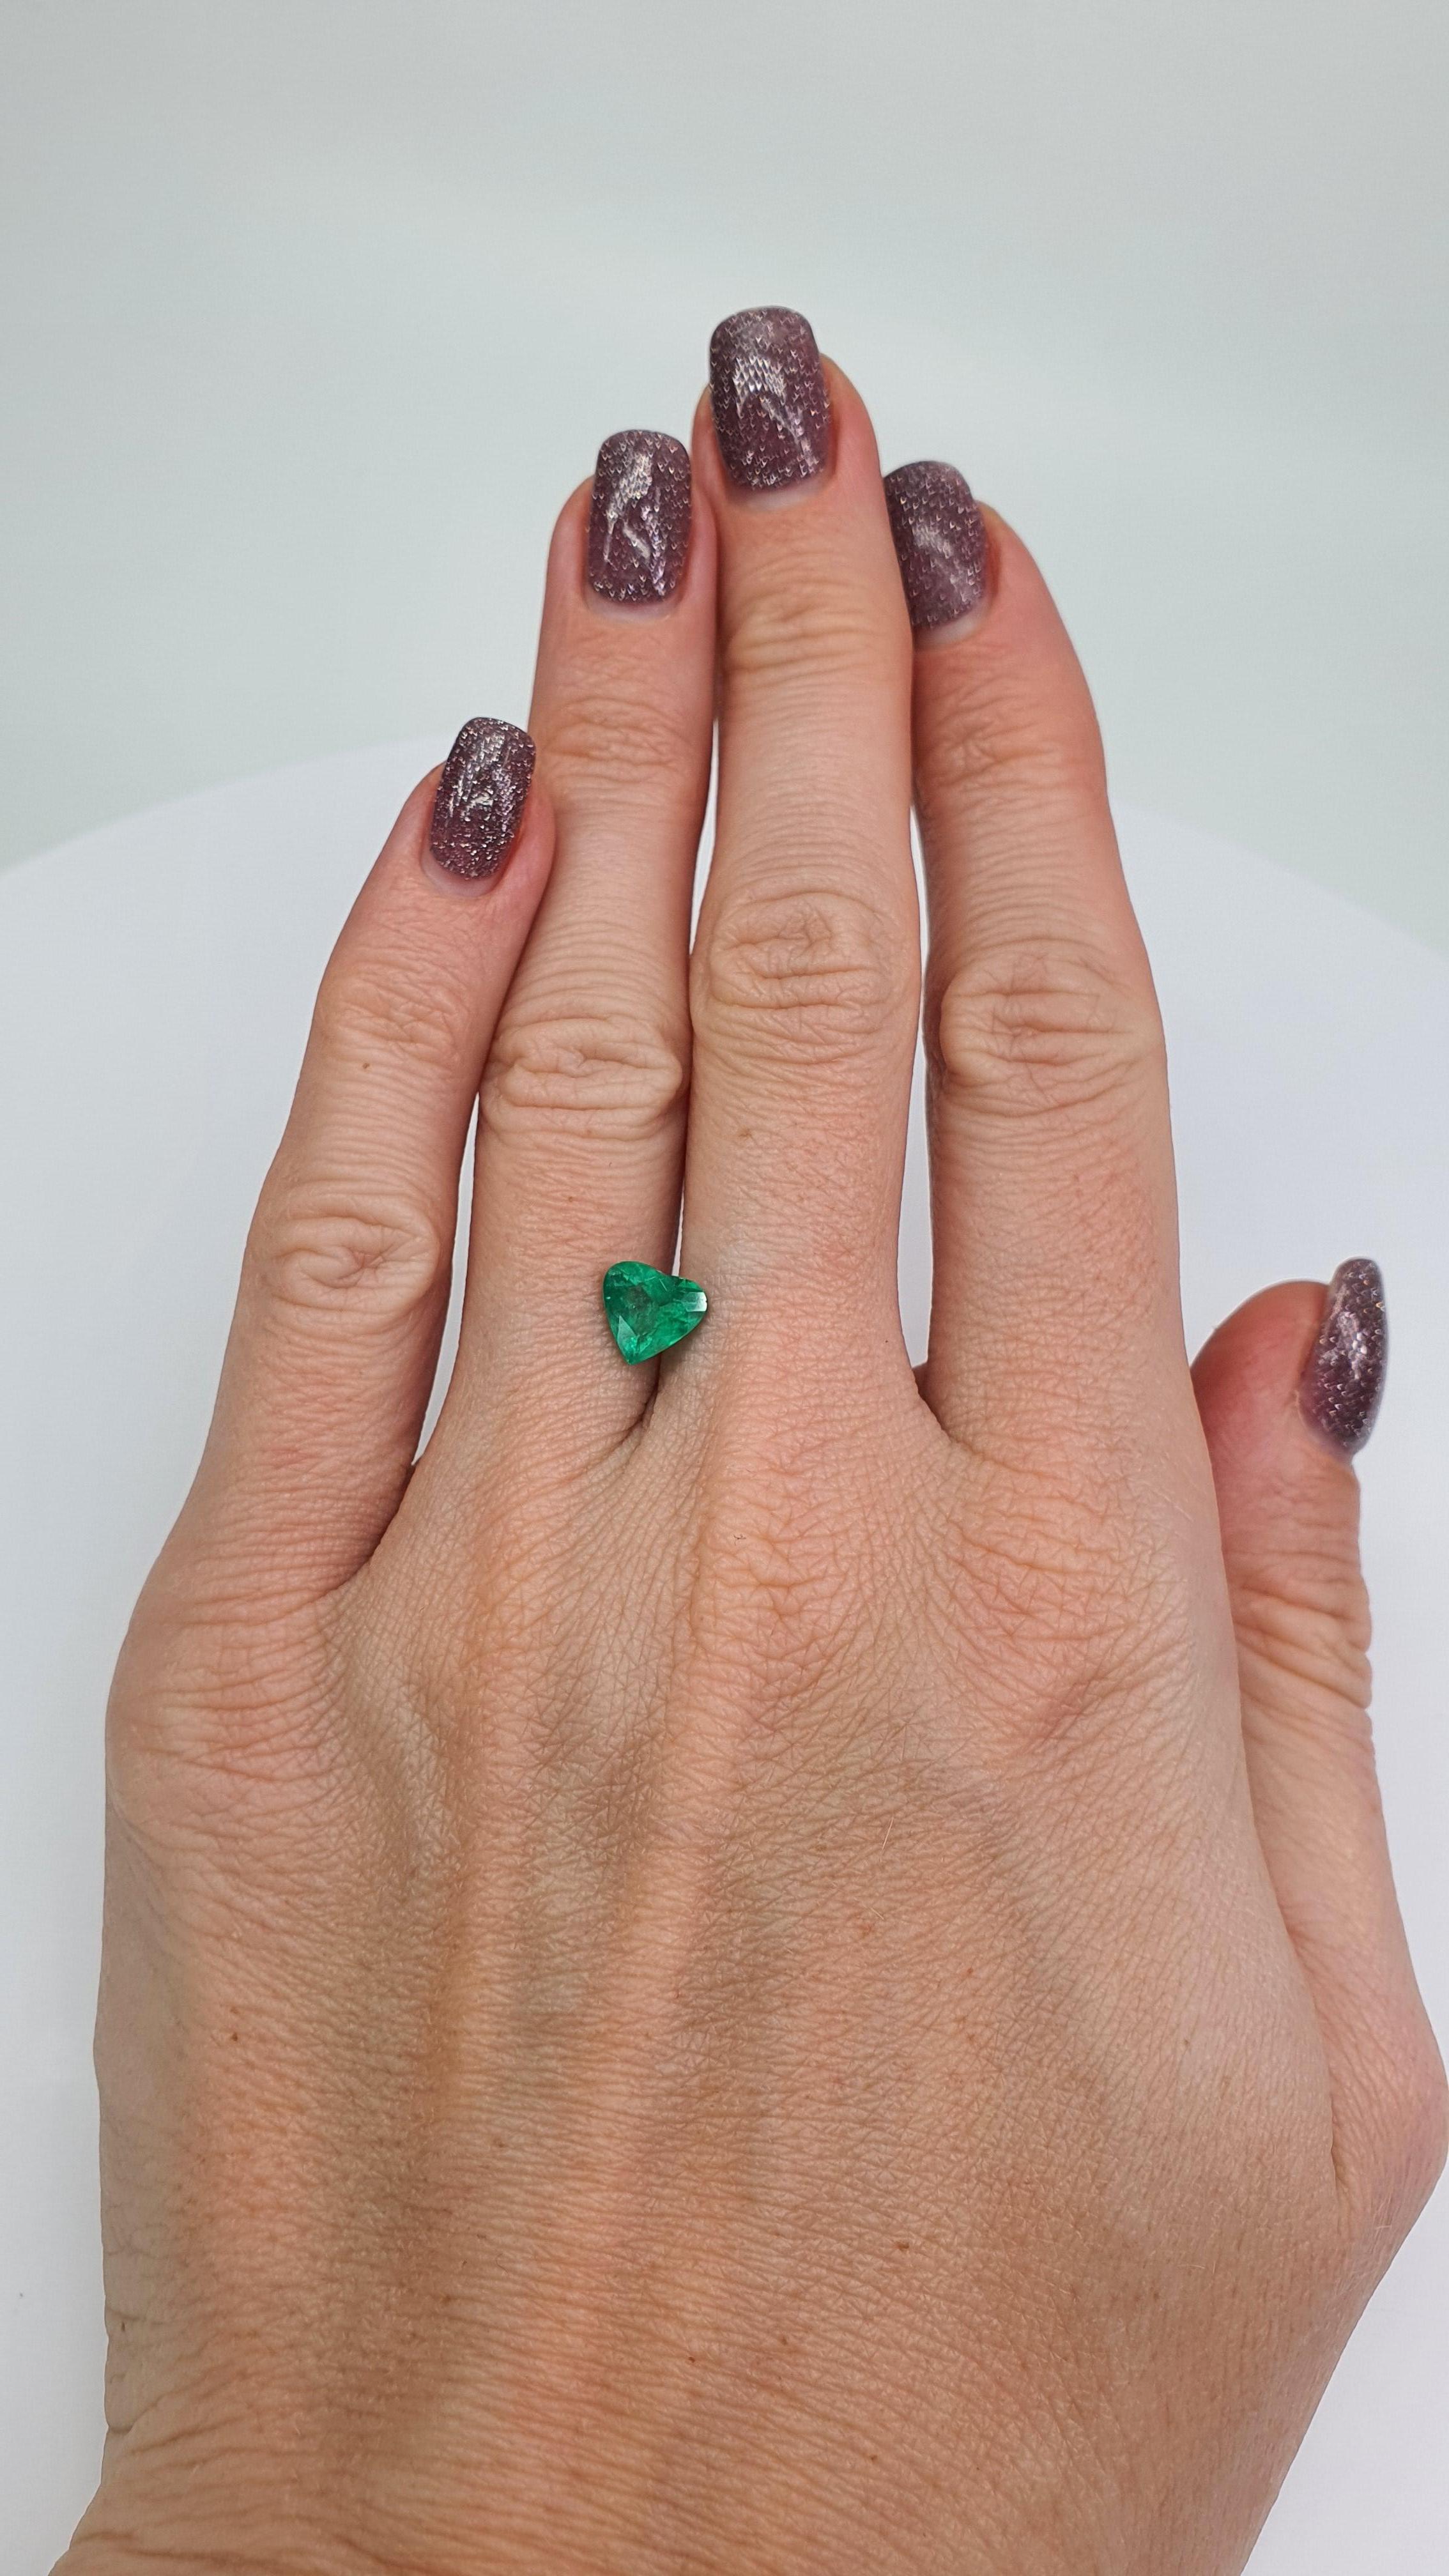 Extremely nice color  beautiful Emerald
💚 Heart shape.
Origin BRAZIL 
Minor oil enhancement. 
Stone can contain natural microcracks which is absolutely normal for emeralds.

The emerald heart can be perfect for your future pendant or ring.